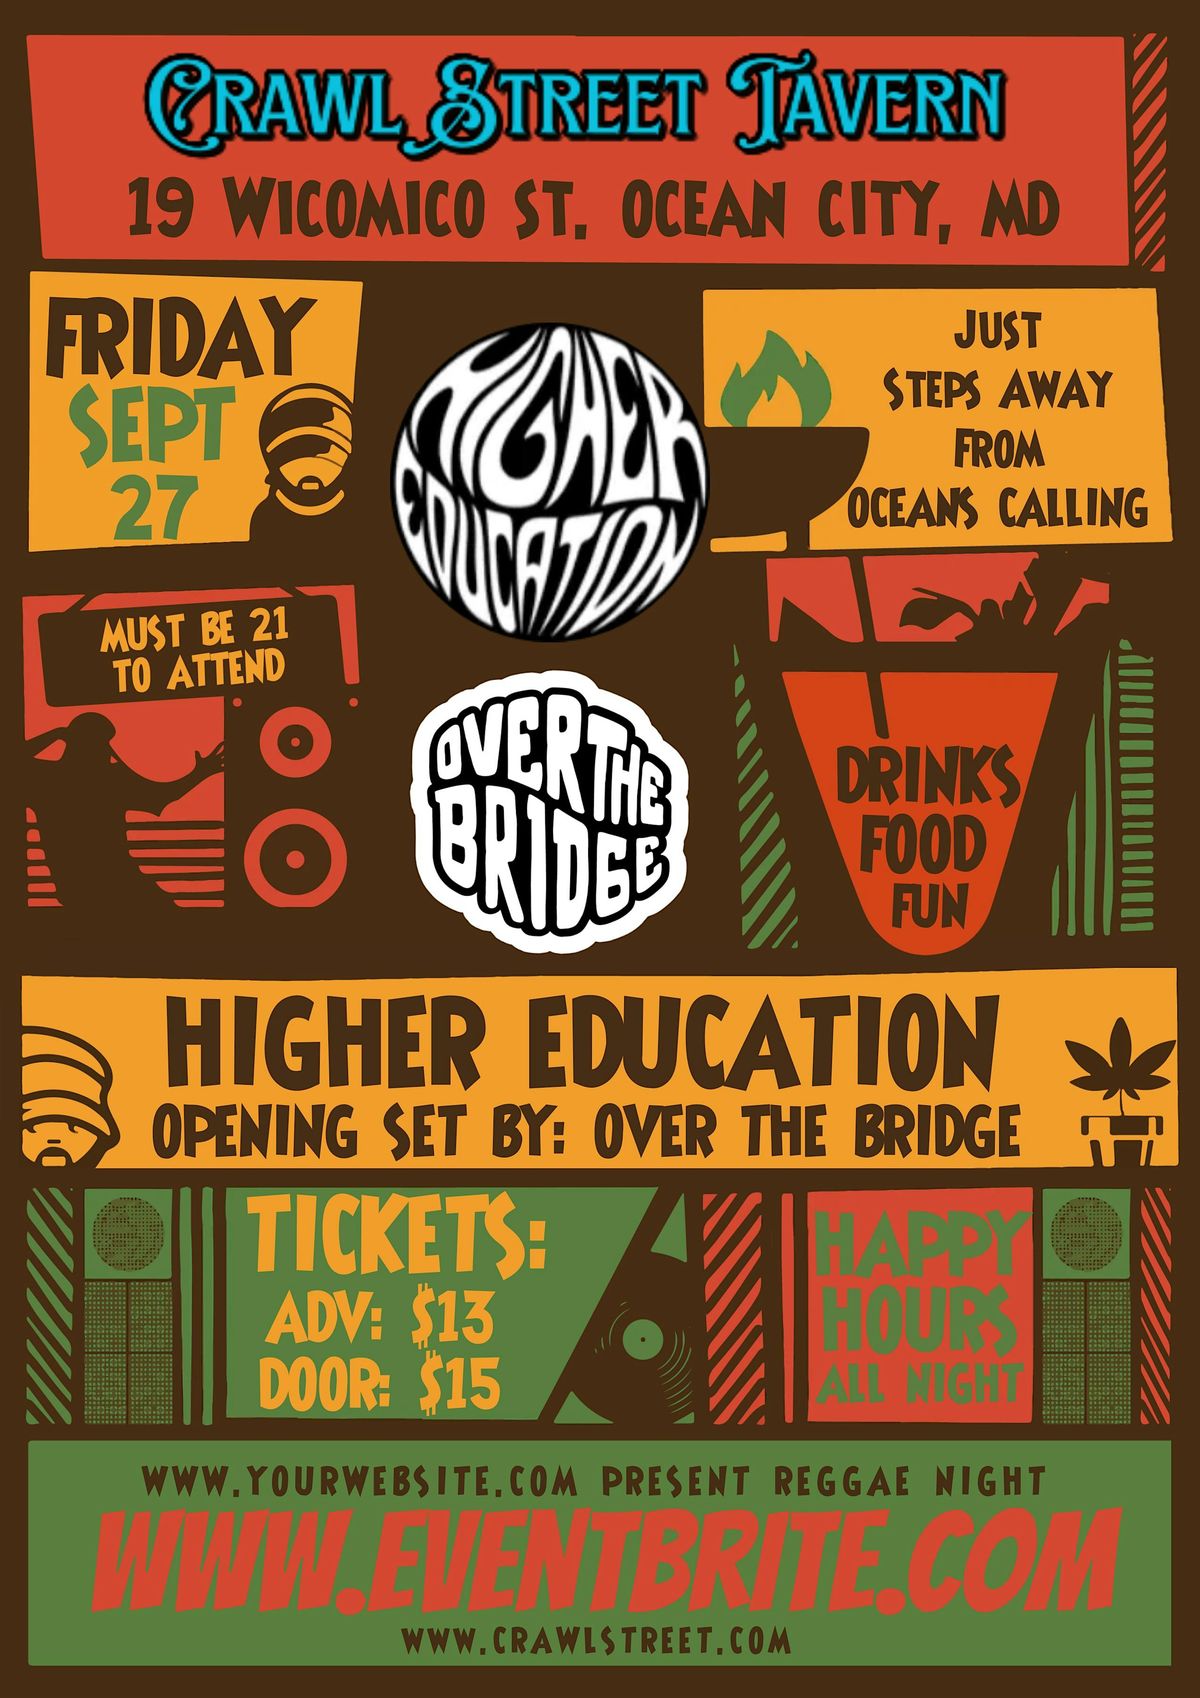 Higher Education and Over The Bridge at Crawl Street Tavern!